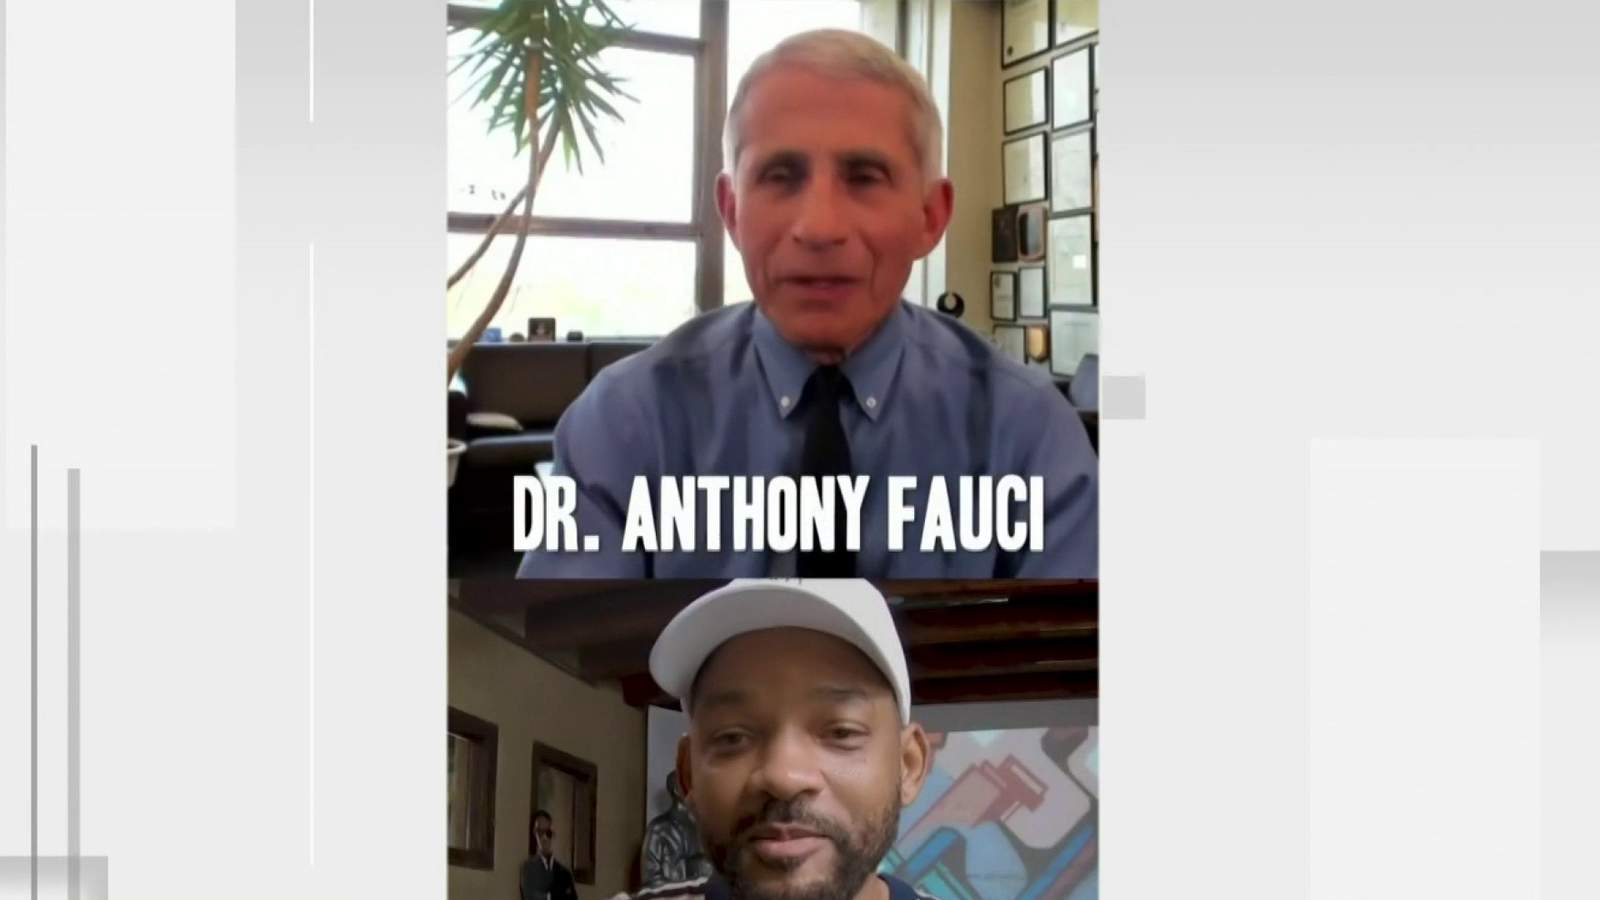 With Will Smith’s help, kids ask Dr. Fauci their top coronavirus questions